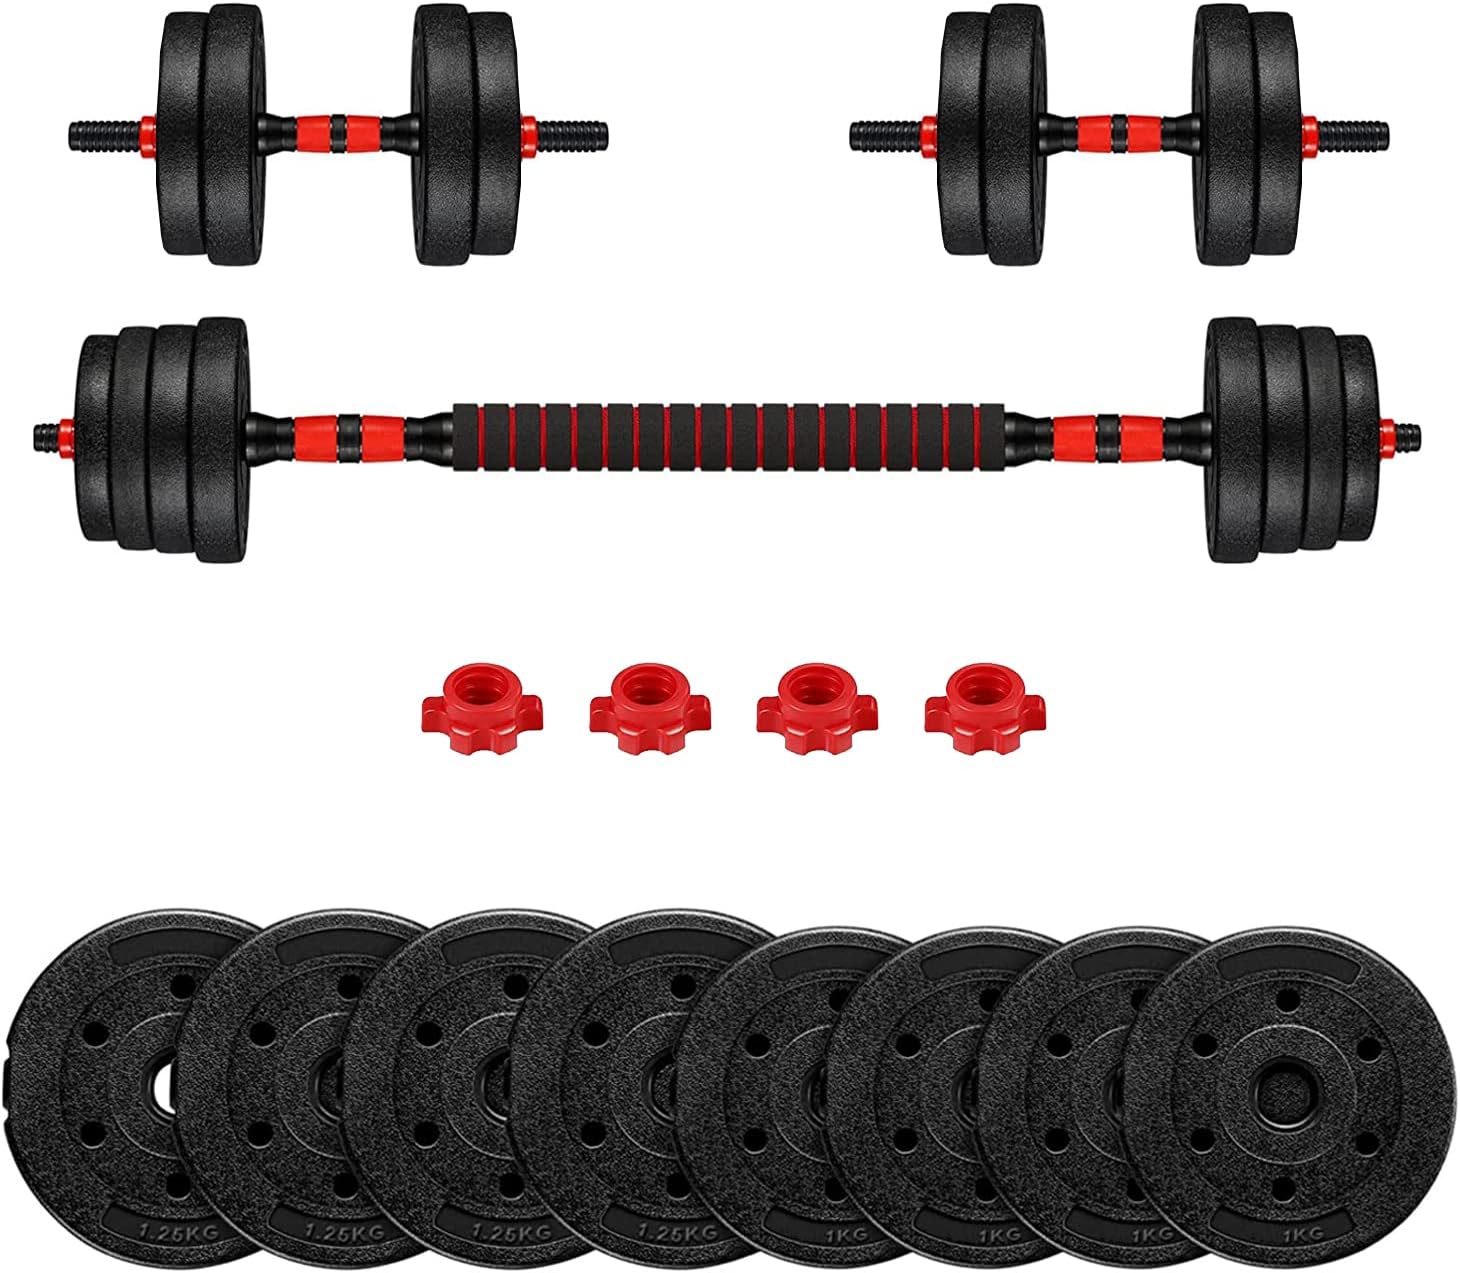 22-88LB Adjustable Weights Dumbbells Set Free Weights Set With Connecting Rod 